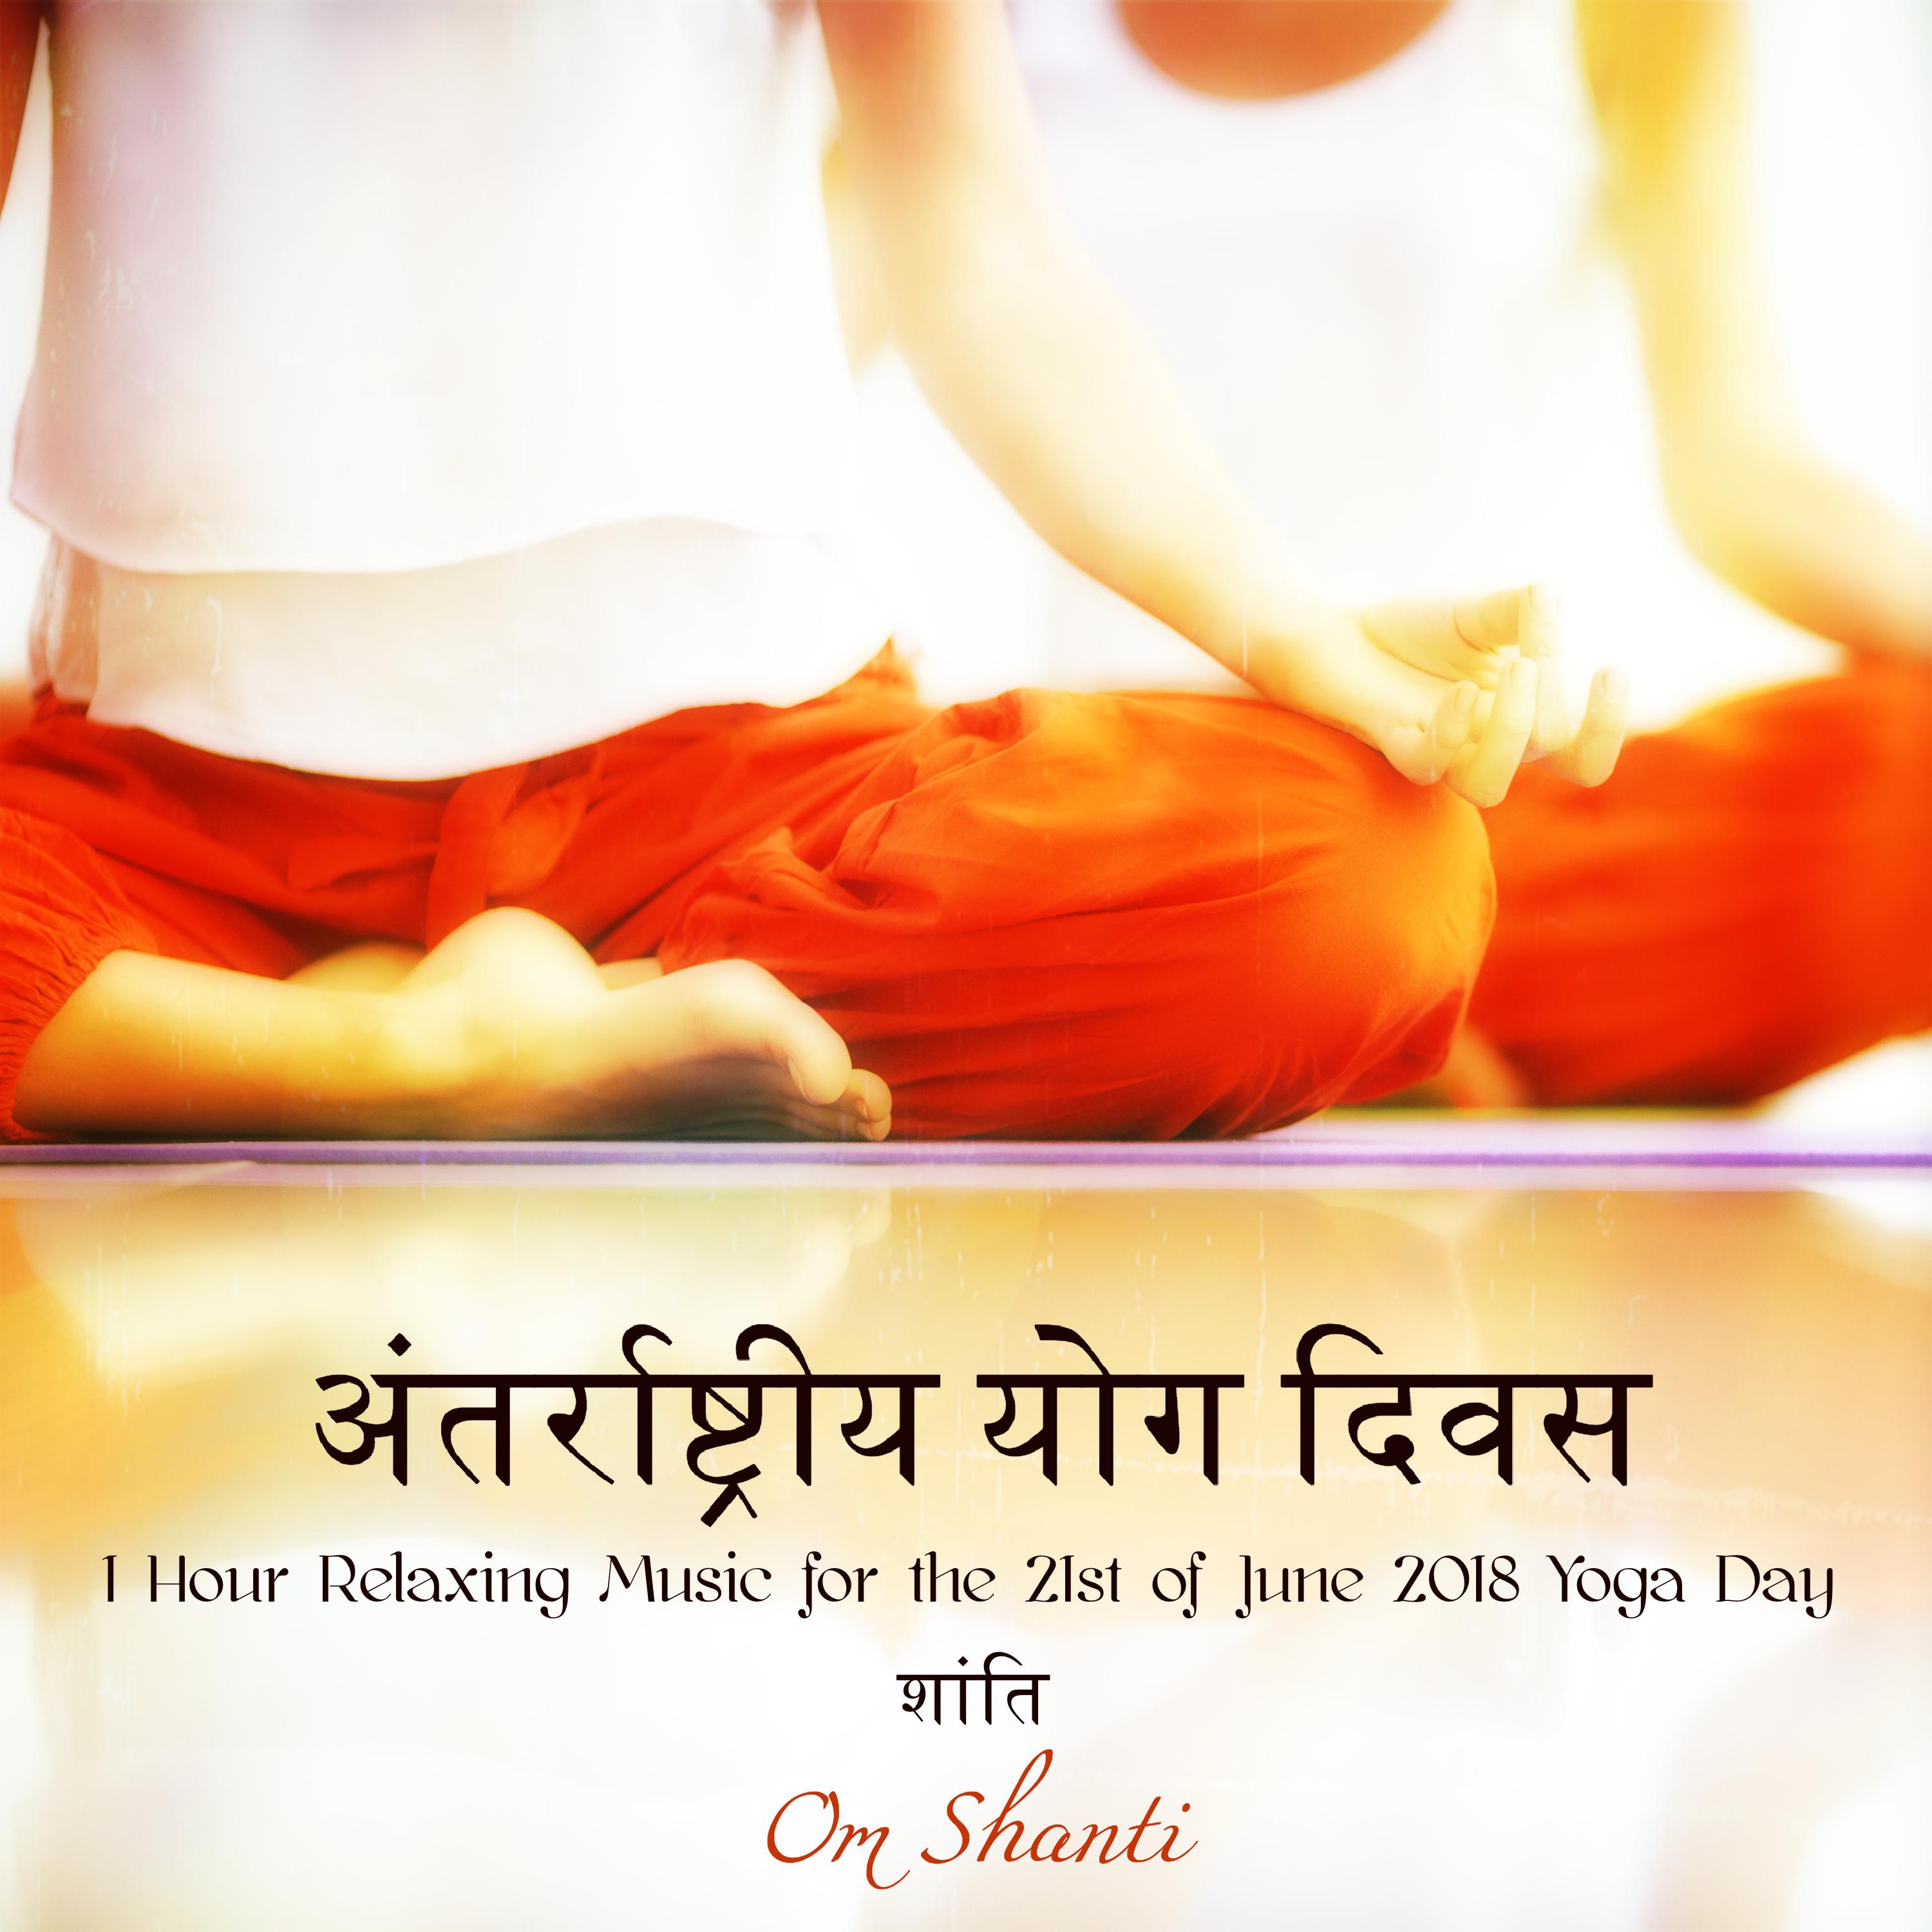 1 Hour Relaxing Music for the 21st of June 2018 Yoga Day  Om Shanti